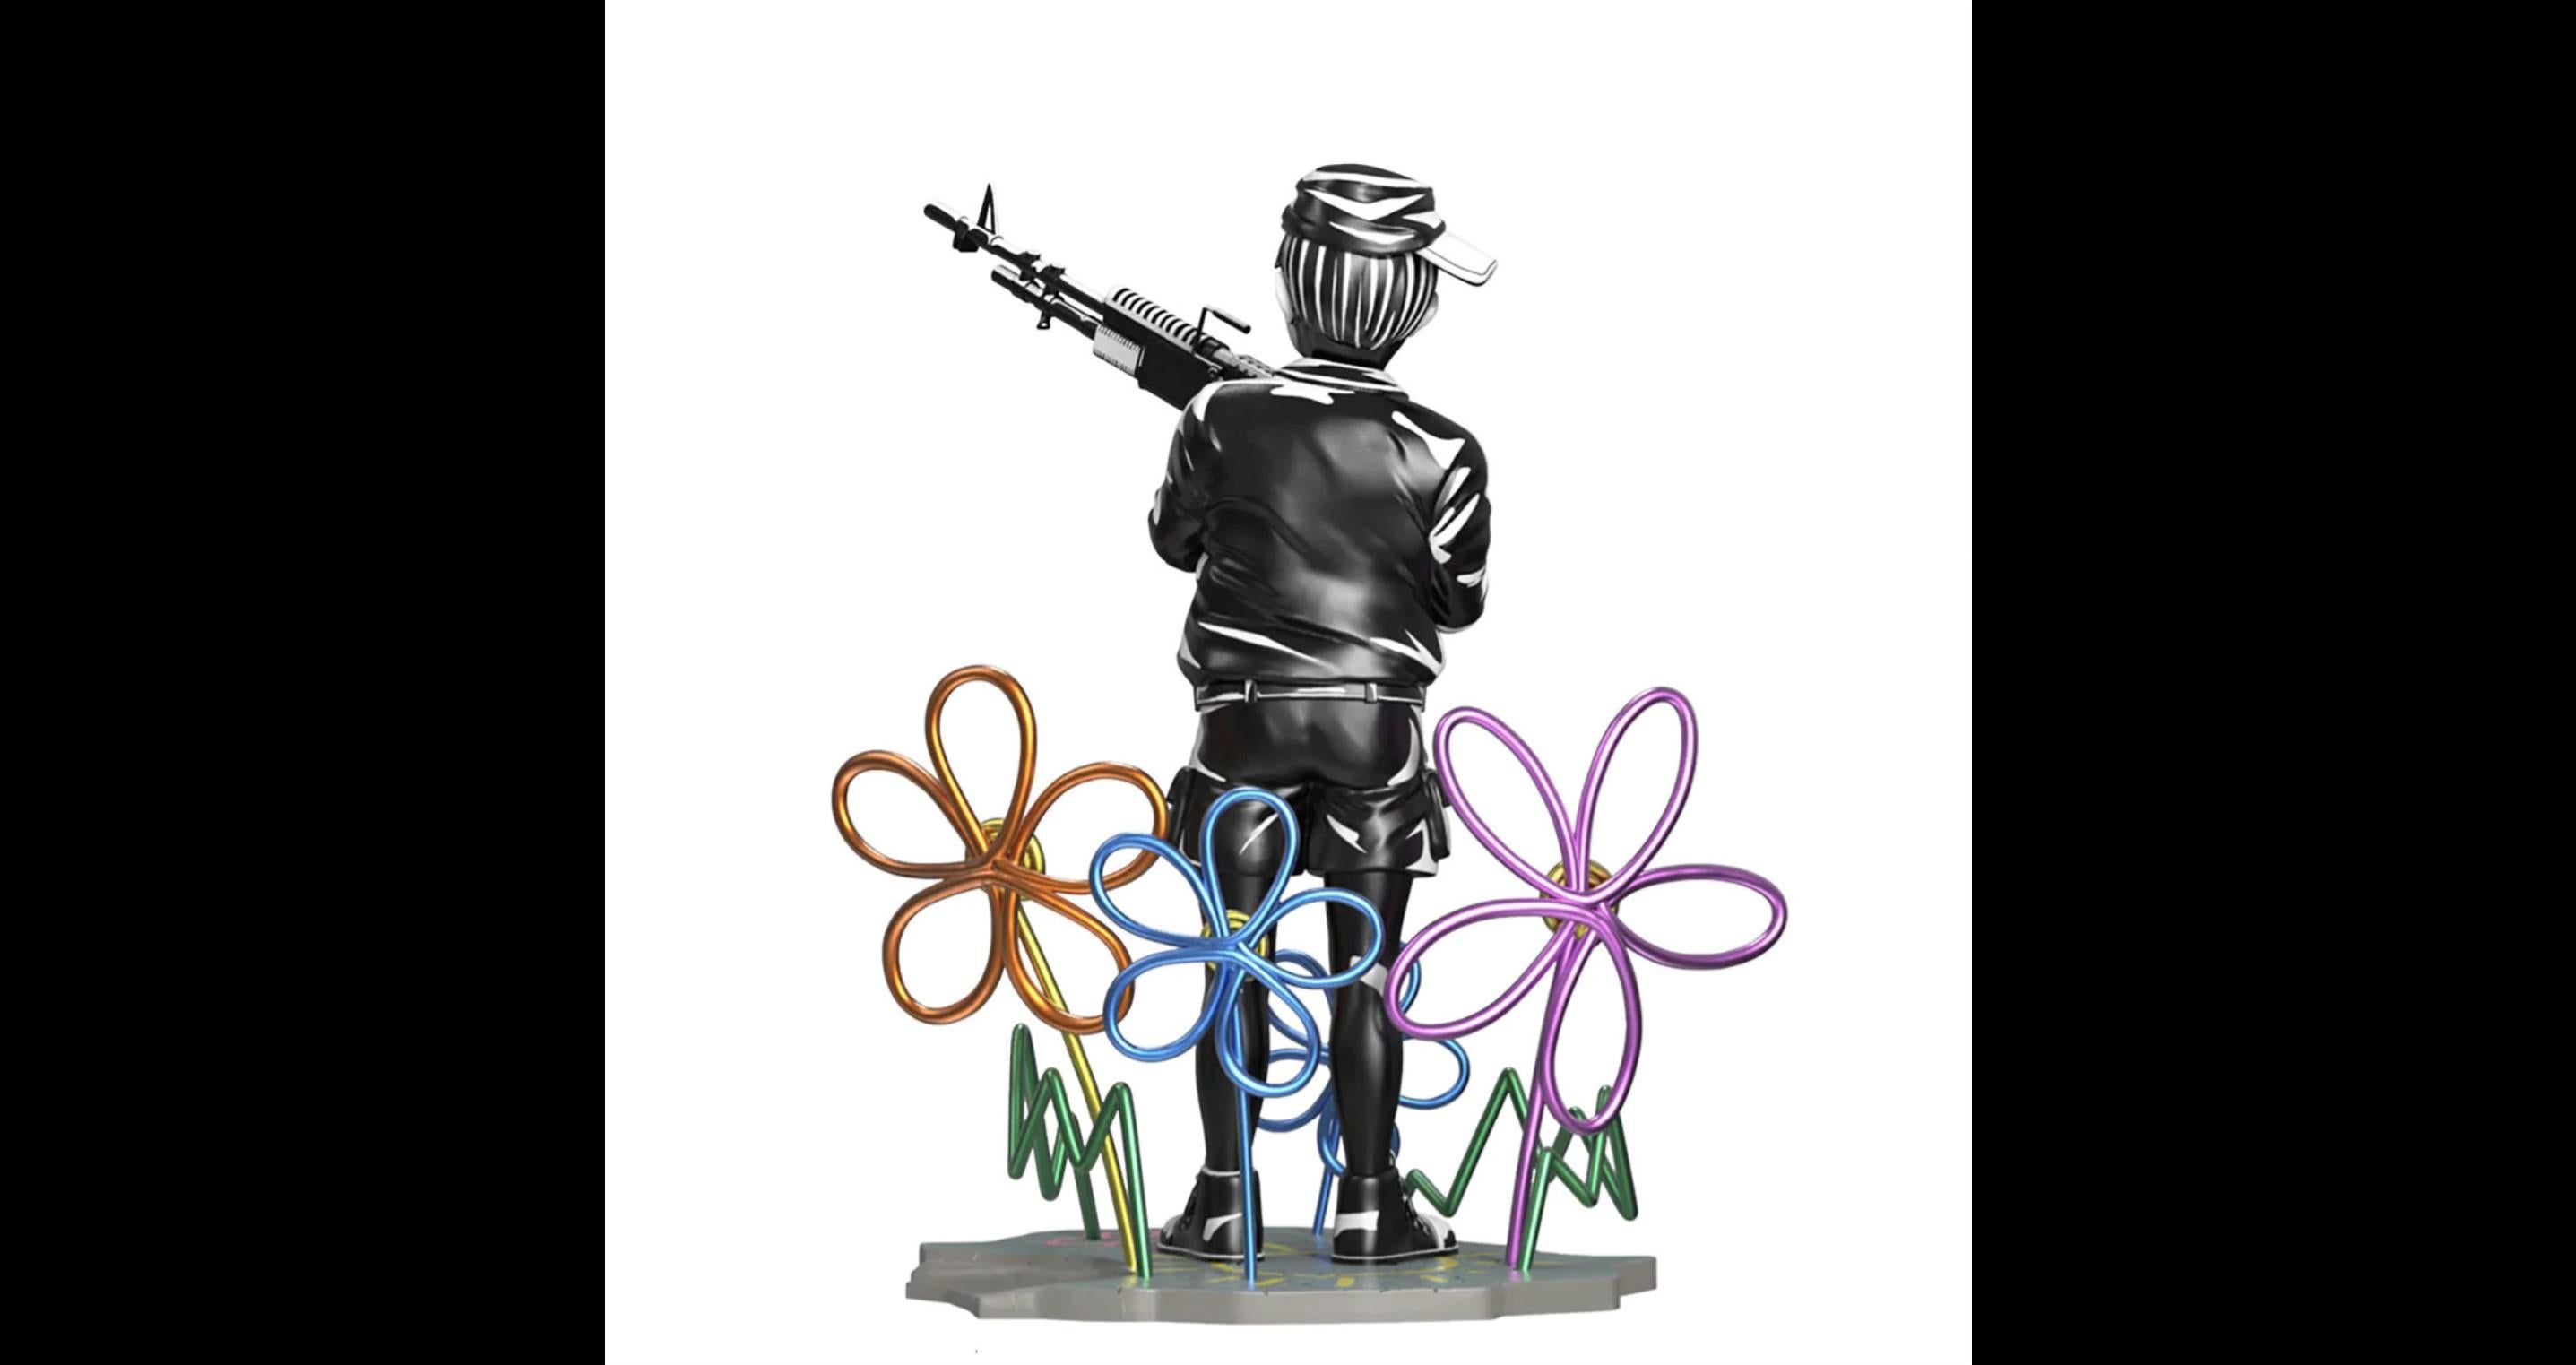 This limited edition designer art sculpture is a collaboration between Brandalised and Mighty Jaxx, based on Banksy's iconic 